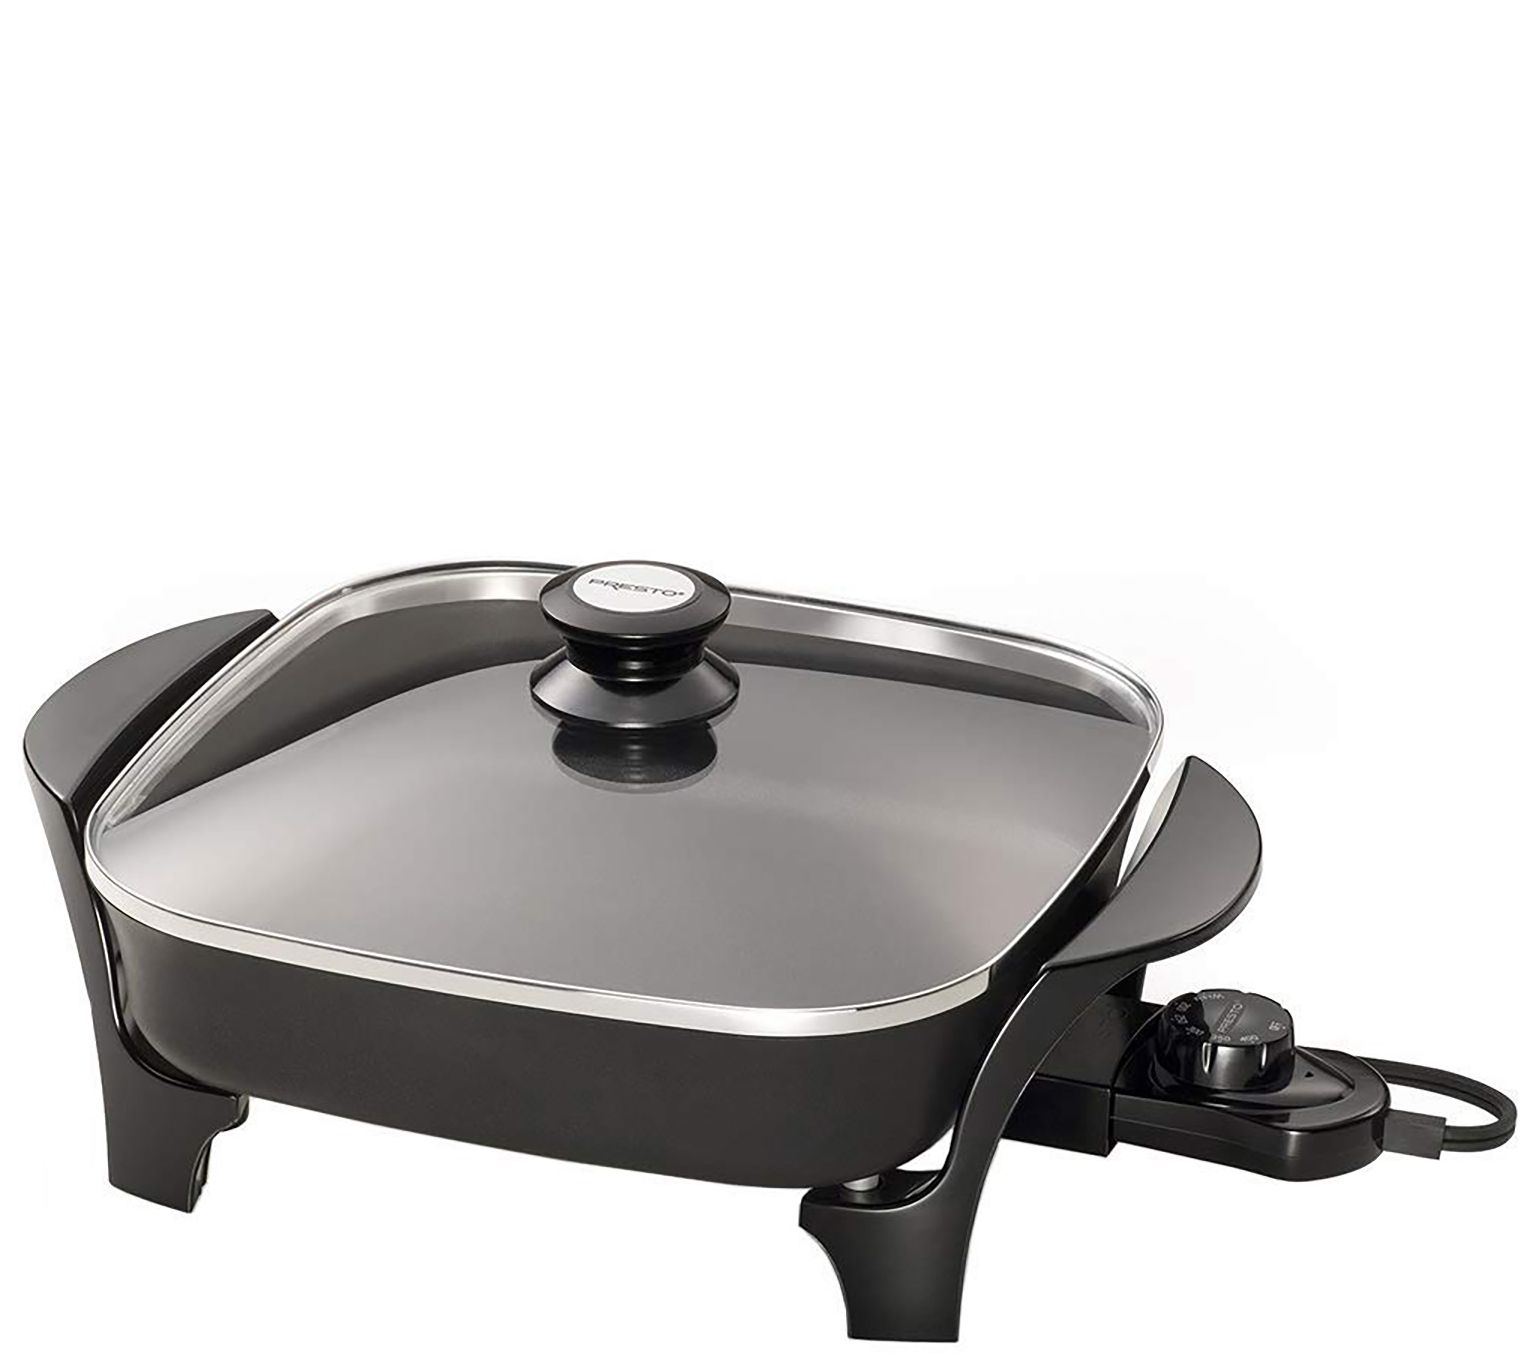 FOHERE Electric Skillet,12 inch Deep Non Stick,Standable Glass Lid,3 Marked Heating Levels,1360W